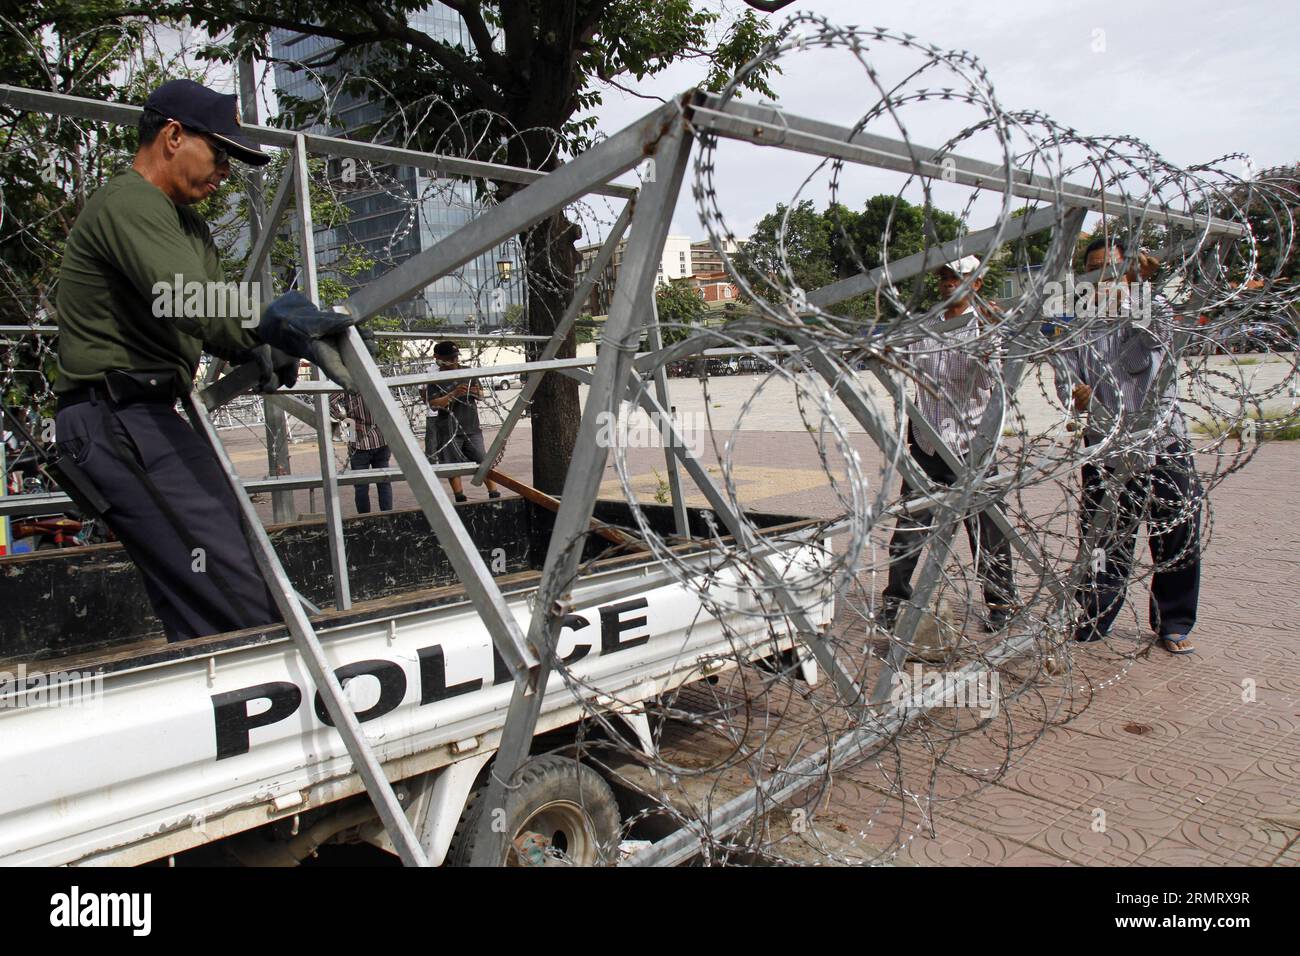 (140806) -- PHNOM PENH, Aug. 6, 2014 -- Policemen remove razor wire from the Freedom Park in Phnom Penh, Cambodia, Aug. 6, 2014. The Cambodian authorities reopened the Freedom Park, a protest-designated site, a day after the opposition s 55 politicians were sworn in as lawmakers. ) CAMBODIA-PHNOM PENH-FREEDOM PARK-REOPENING Sovannara PUBLICATIONxNOTxINxCHN   Phnom Penh Aug 6 2014 Policemen REMOVE Razor Wire from The Freedom Park in Phnom Penh Cambodia Aug 6 2014 The Cambodian Authorities reopened The Freedom Park a Protest Designated Site a Day After The Opposition S 55 Politicians Were  in As Stock Photo